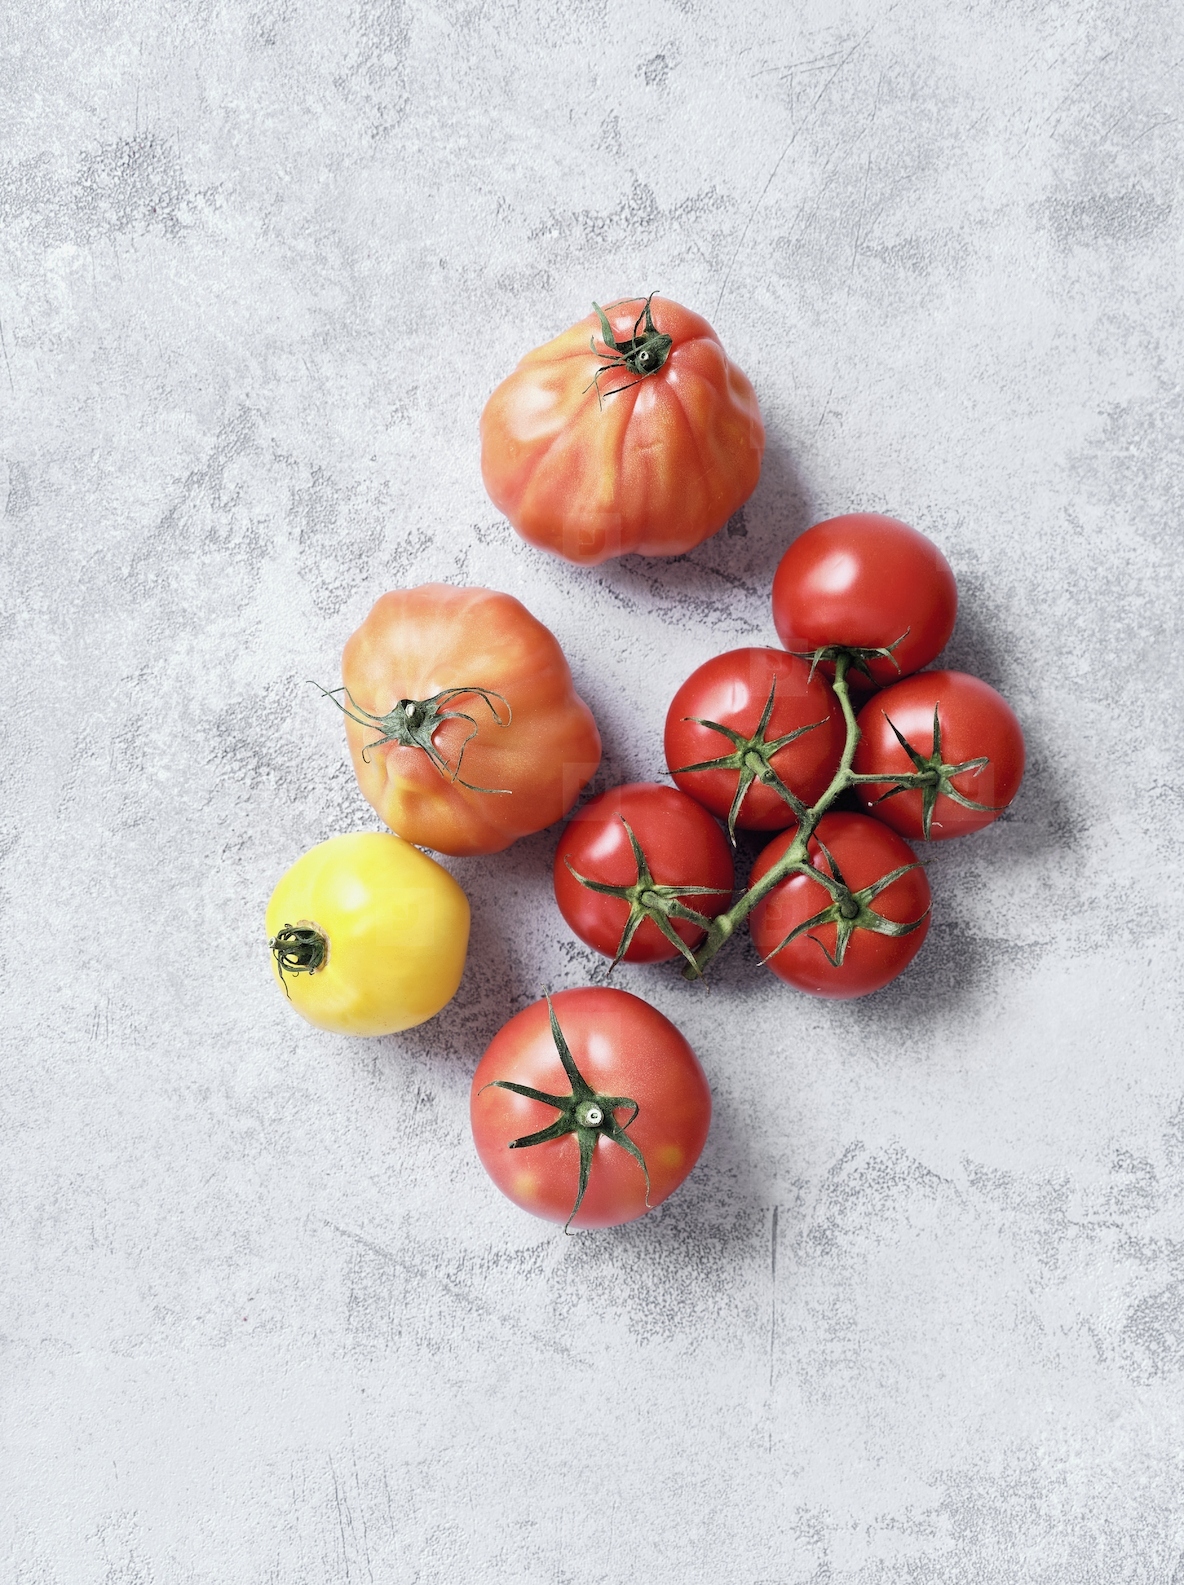 Still life variety red and yellow tomatoes on gray background